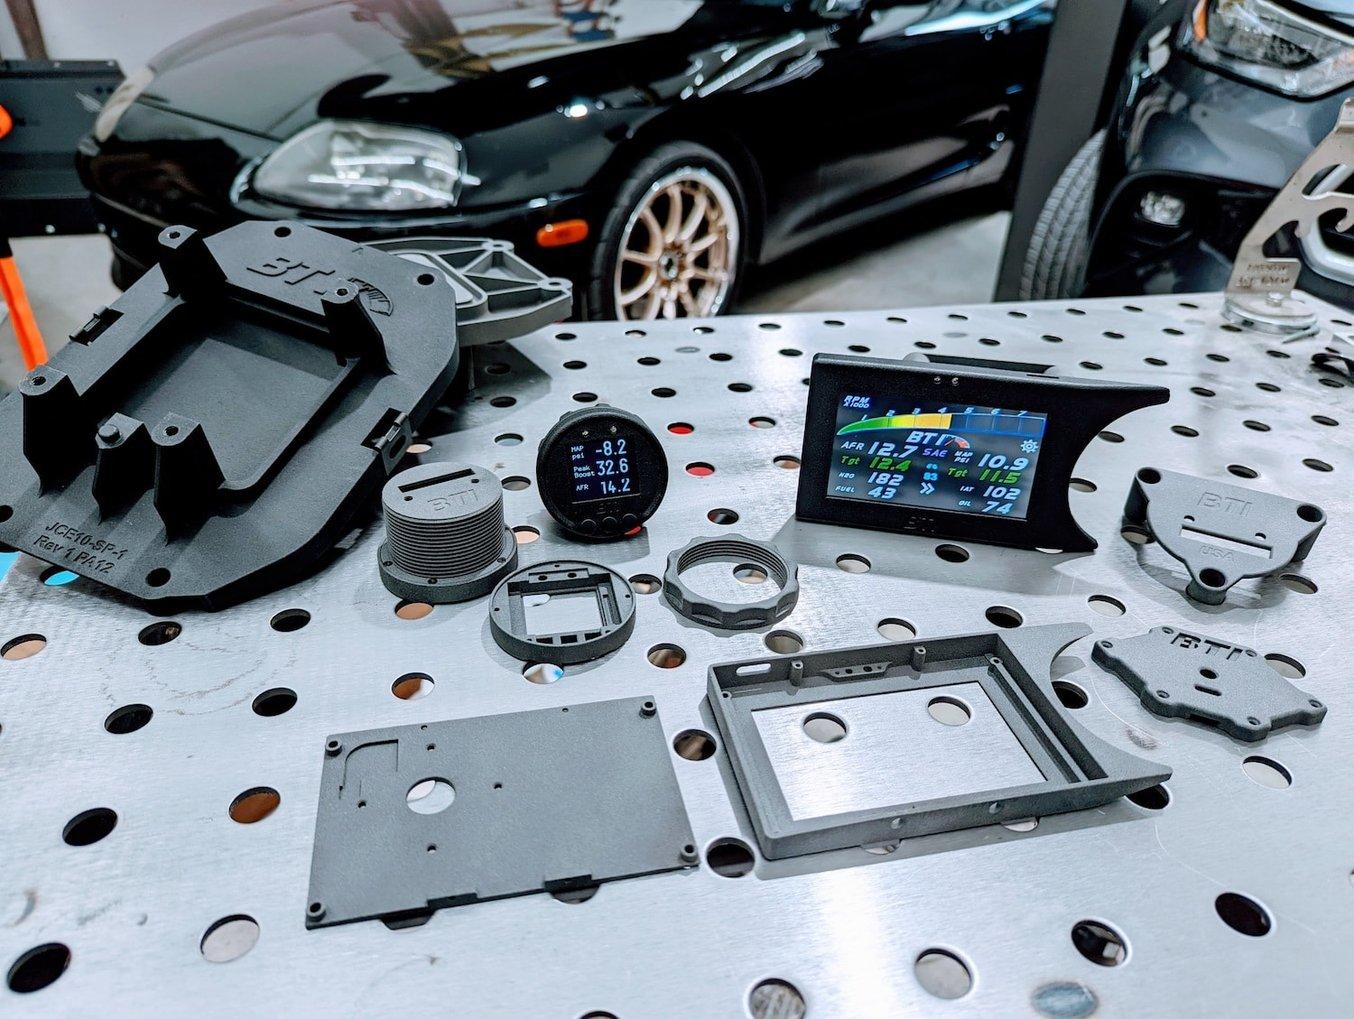 example of aftermarket parts with 3D printing - bti gauges